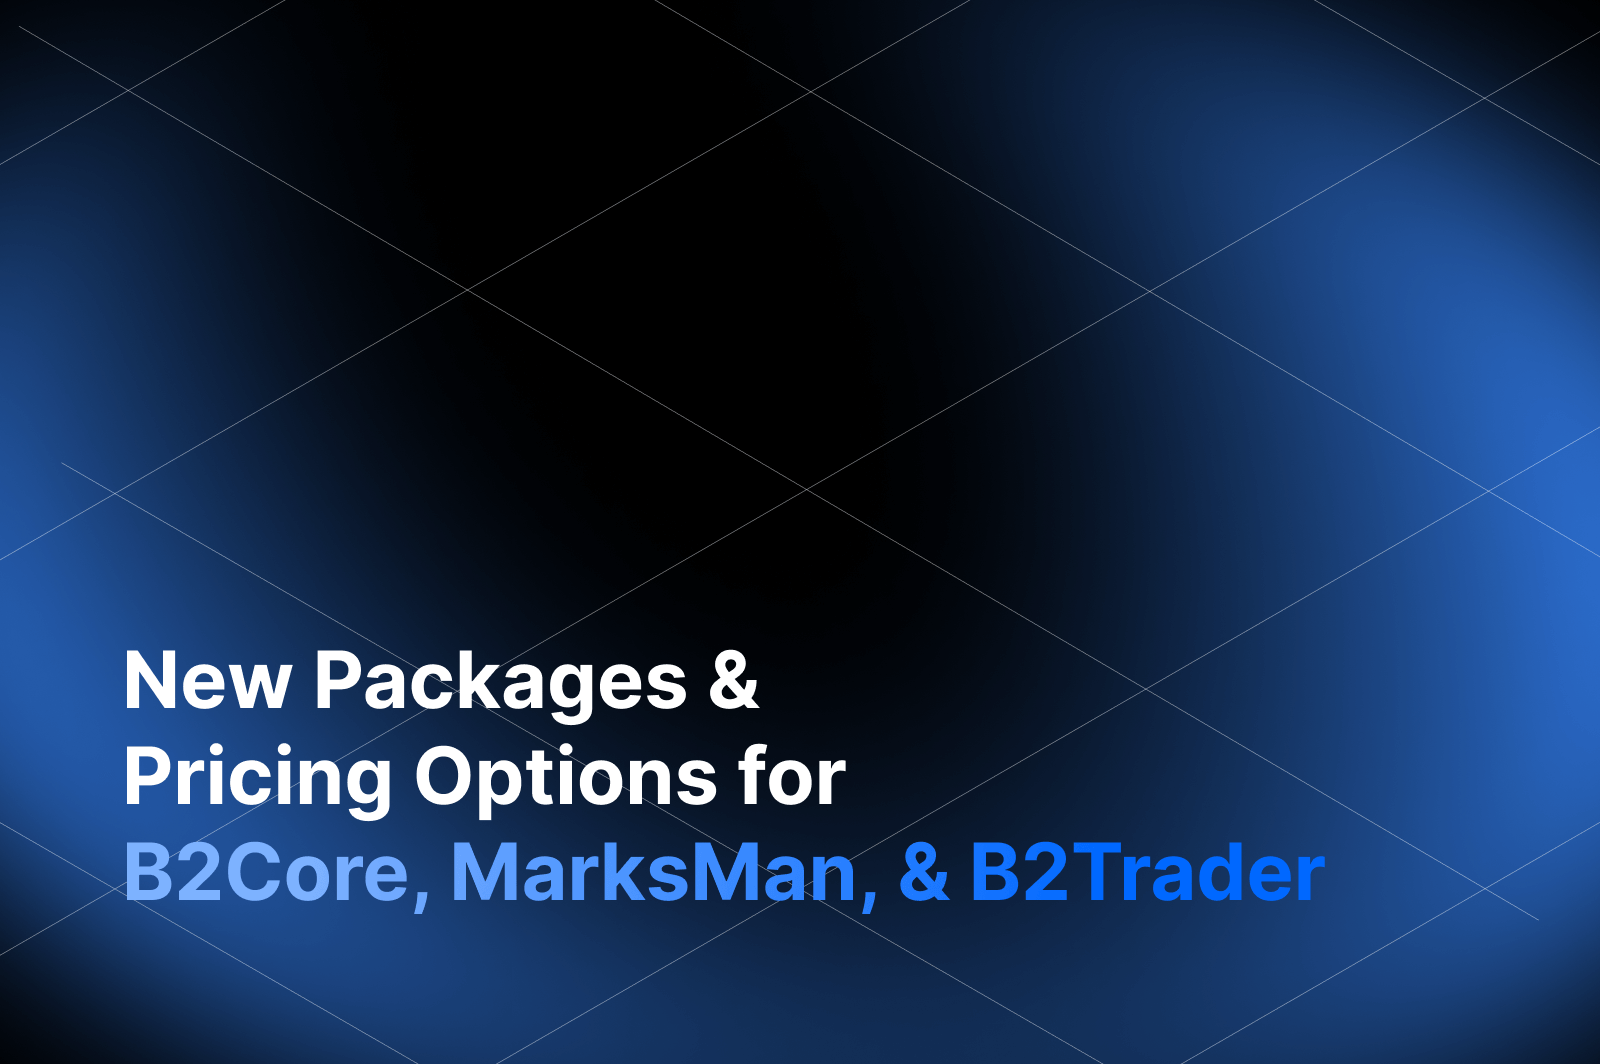 B2Broker's Leading Products - B2Core, MarksMan, and B2Trader - Are Now Even More Accessible